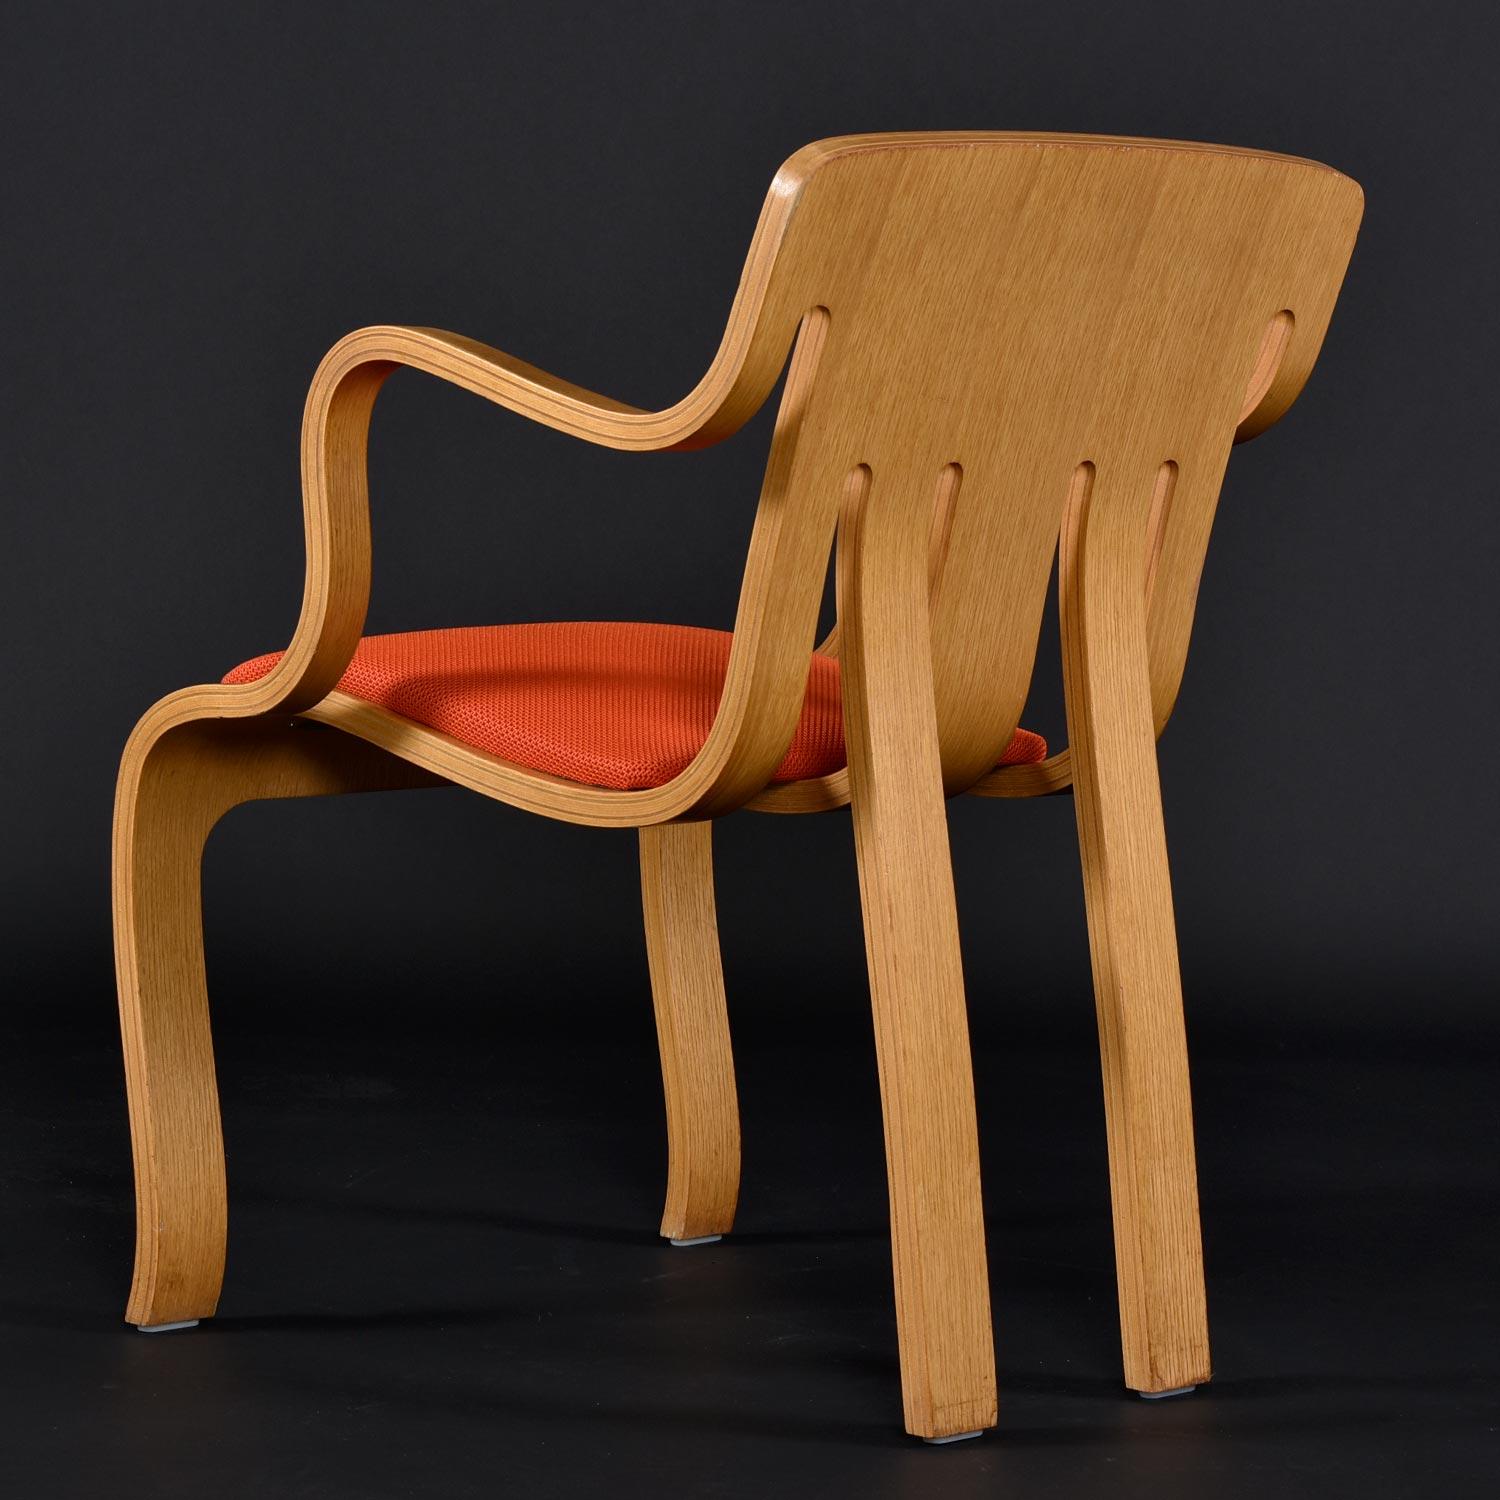 Late 20th Century 1978 Molded Plywood Armchair Set of 2 in Oak by Peter Danko for Thonet For Sale